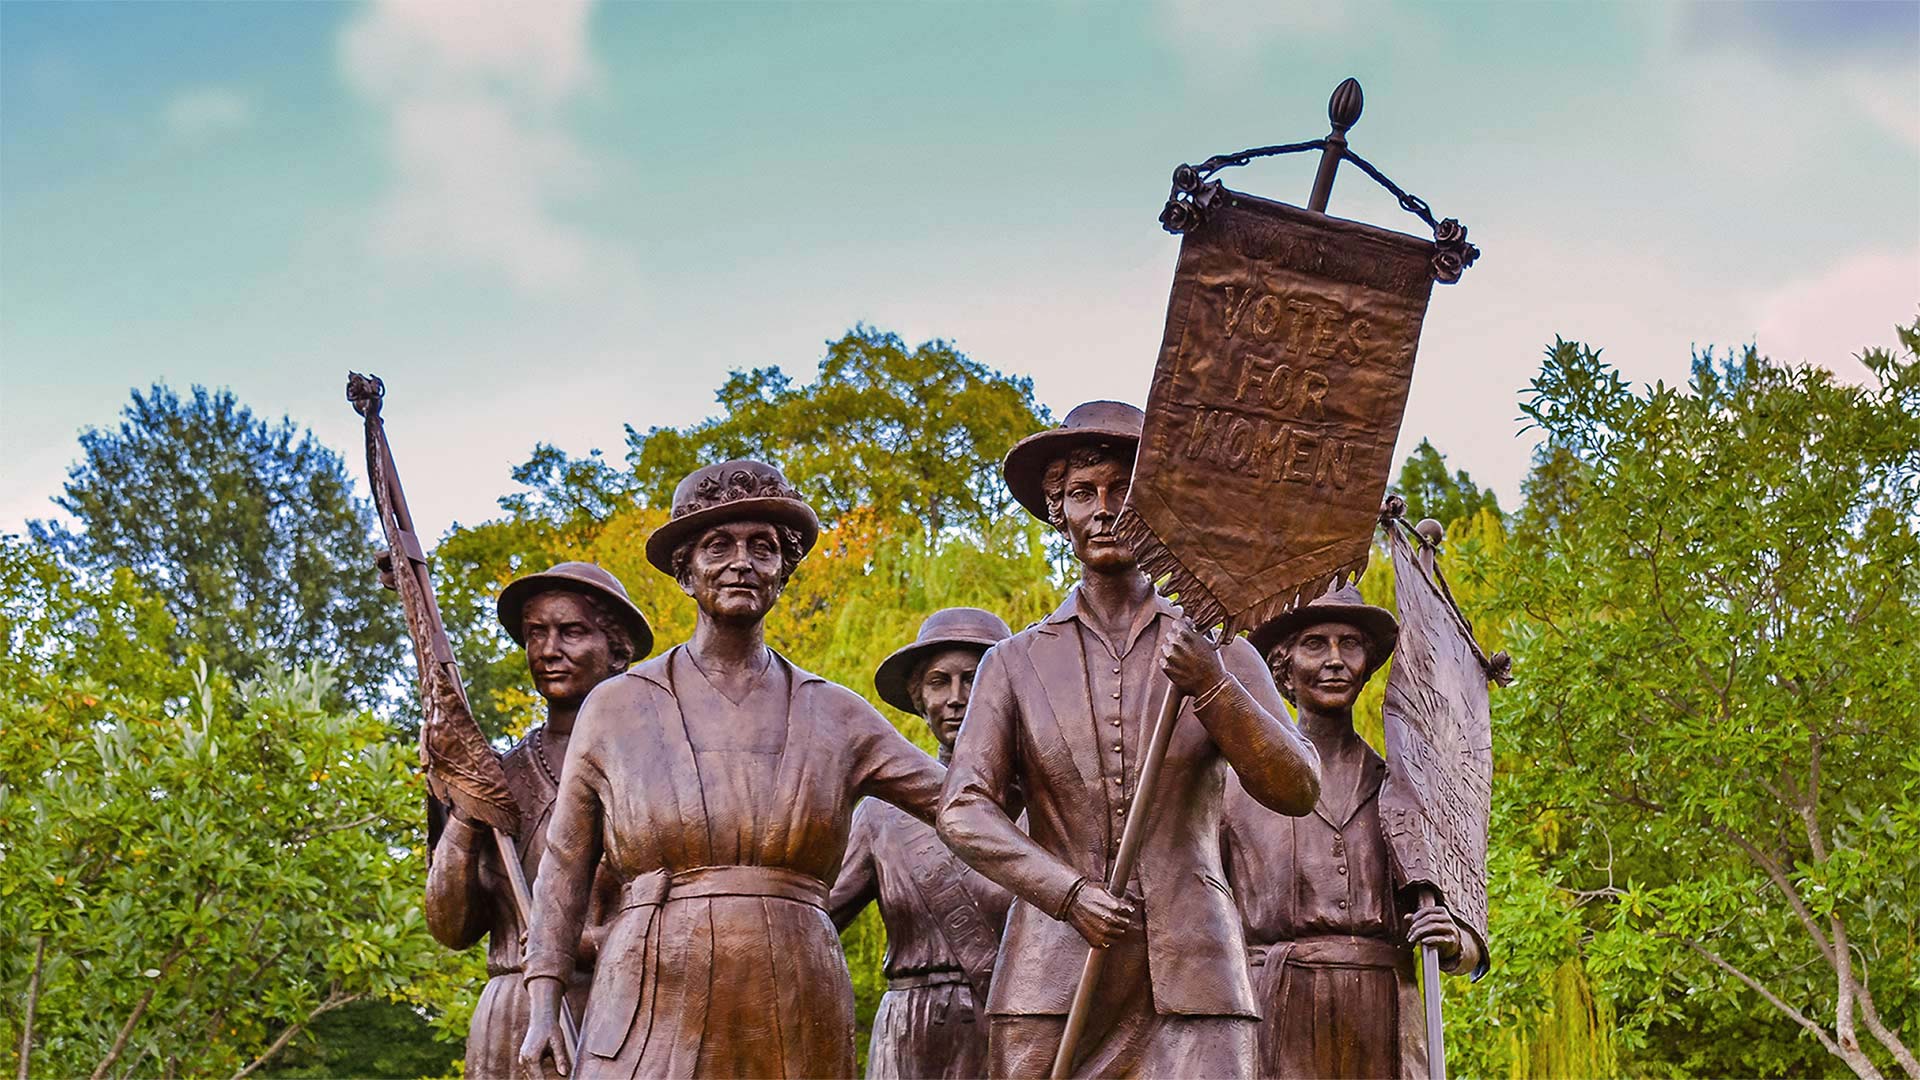 Tennessee Woman Suffrage Monument in Centennial Park, Nashville, Tennessee - jejim120/Alamy)